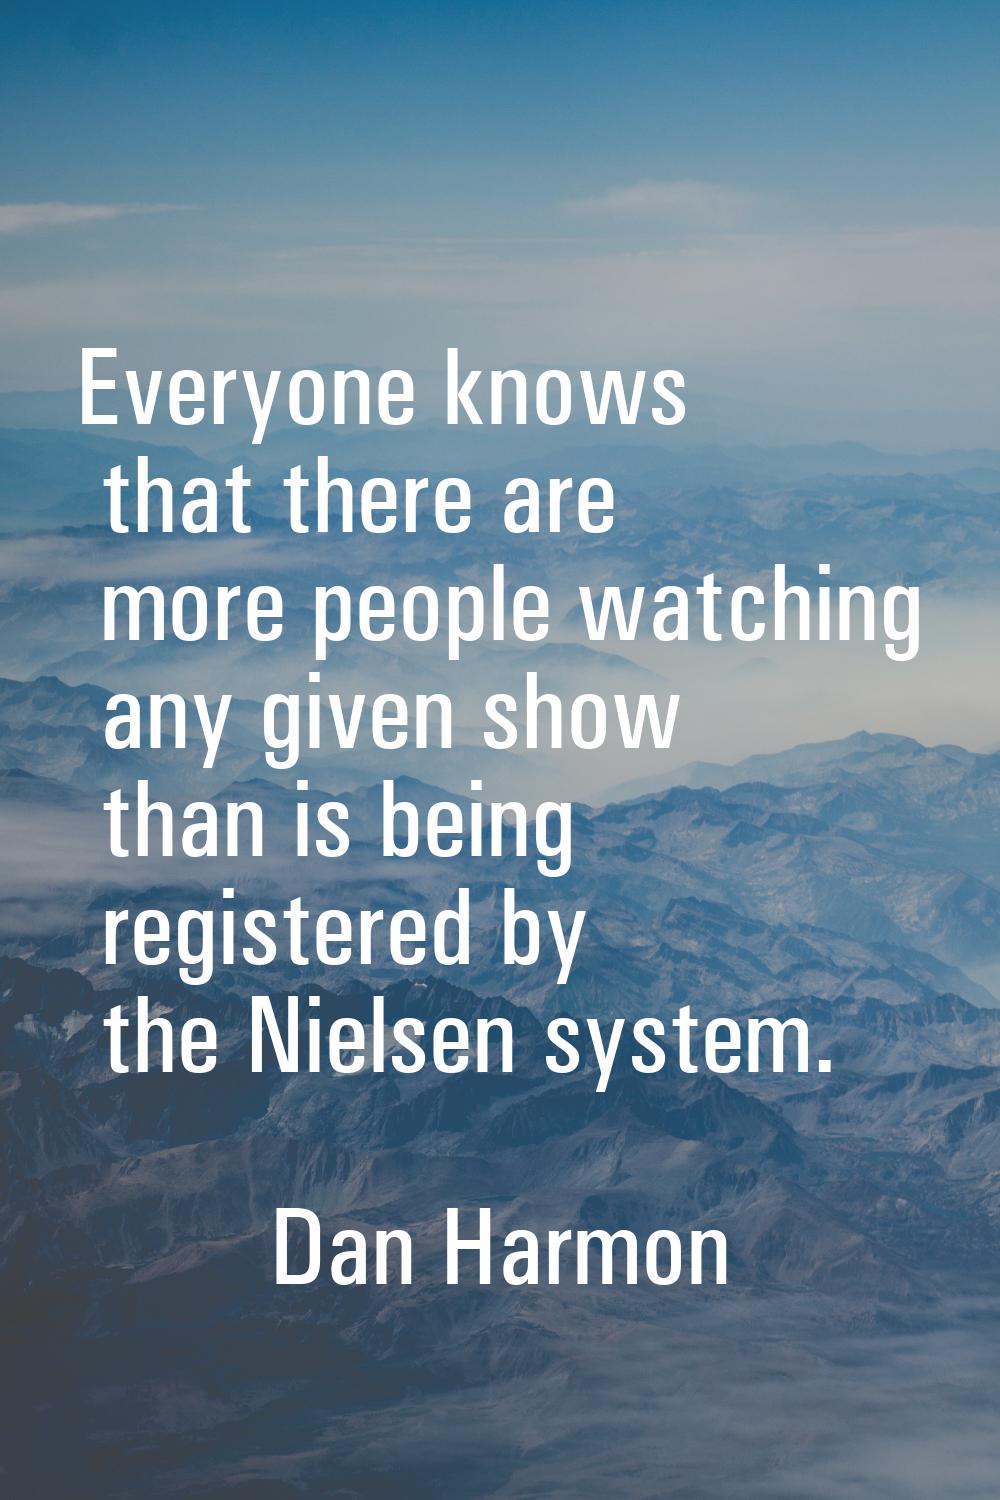 Everyone knows that there are more people watching any given show than is being registered by the N